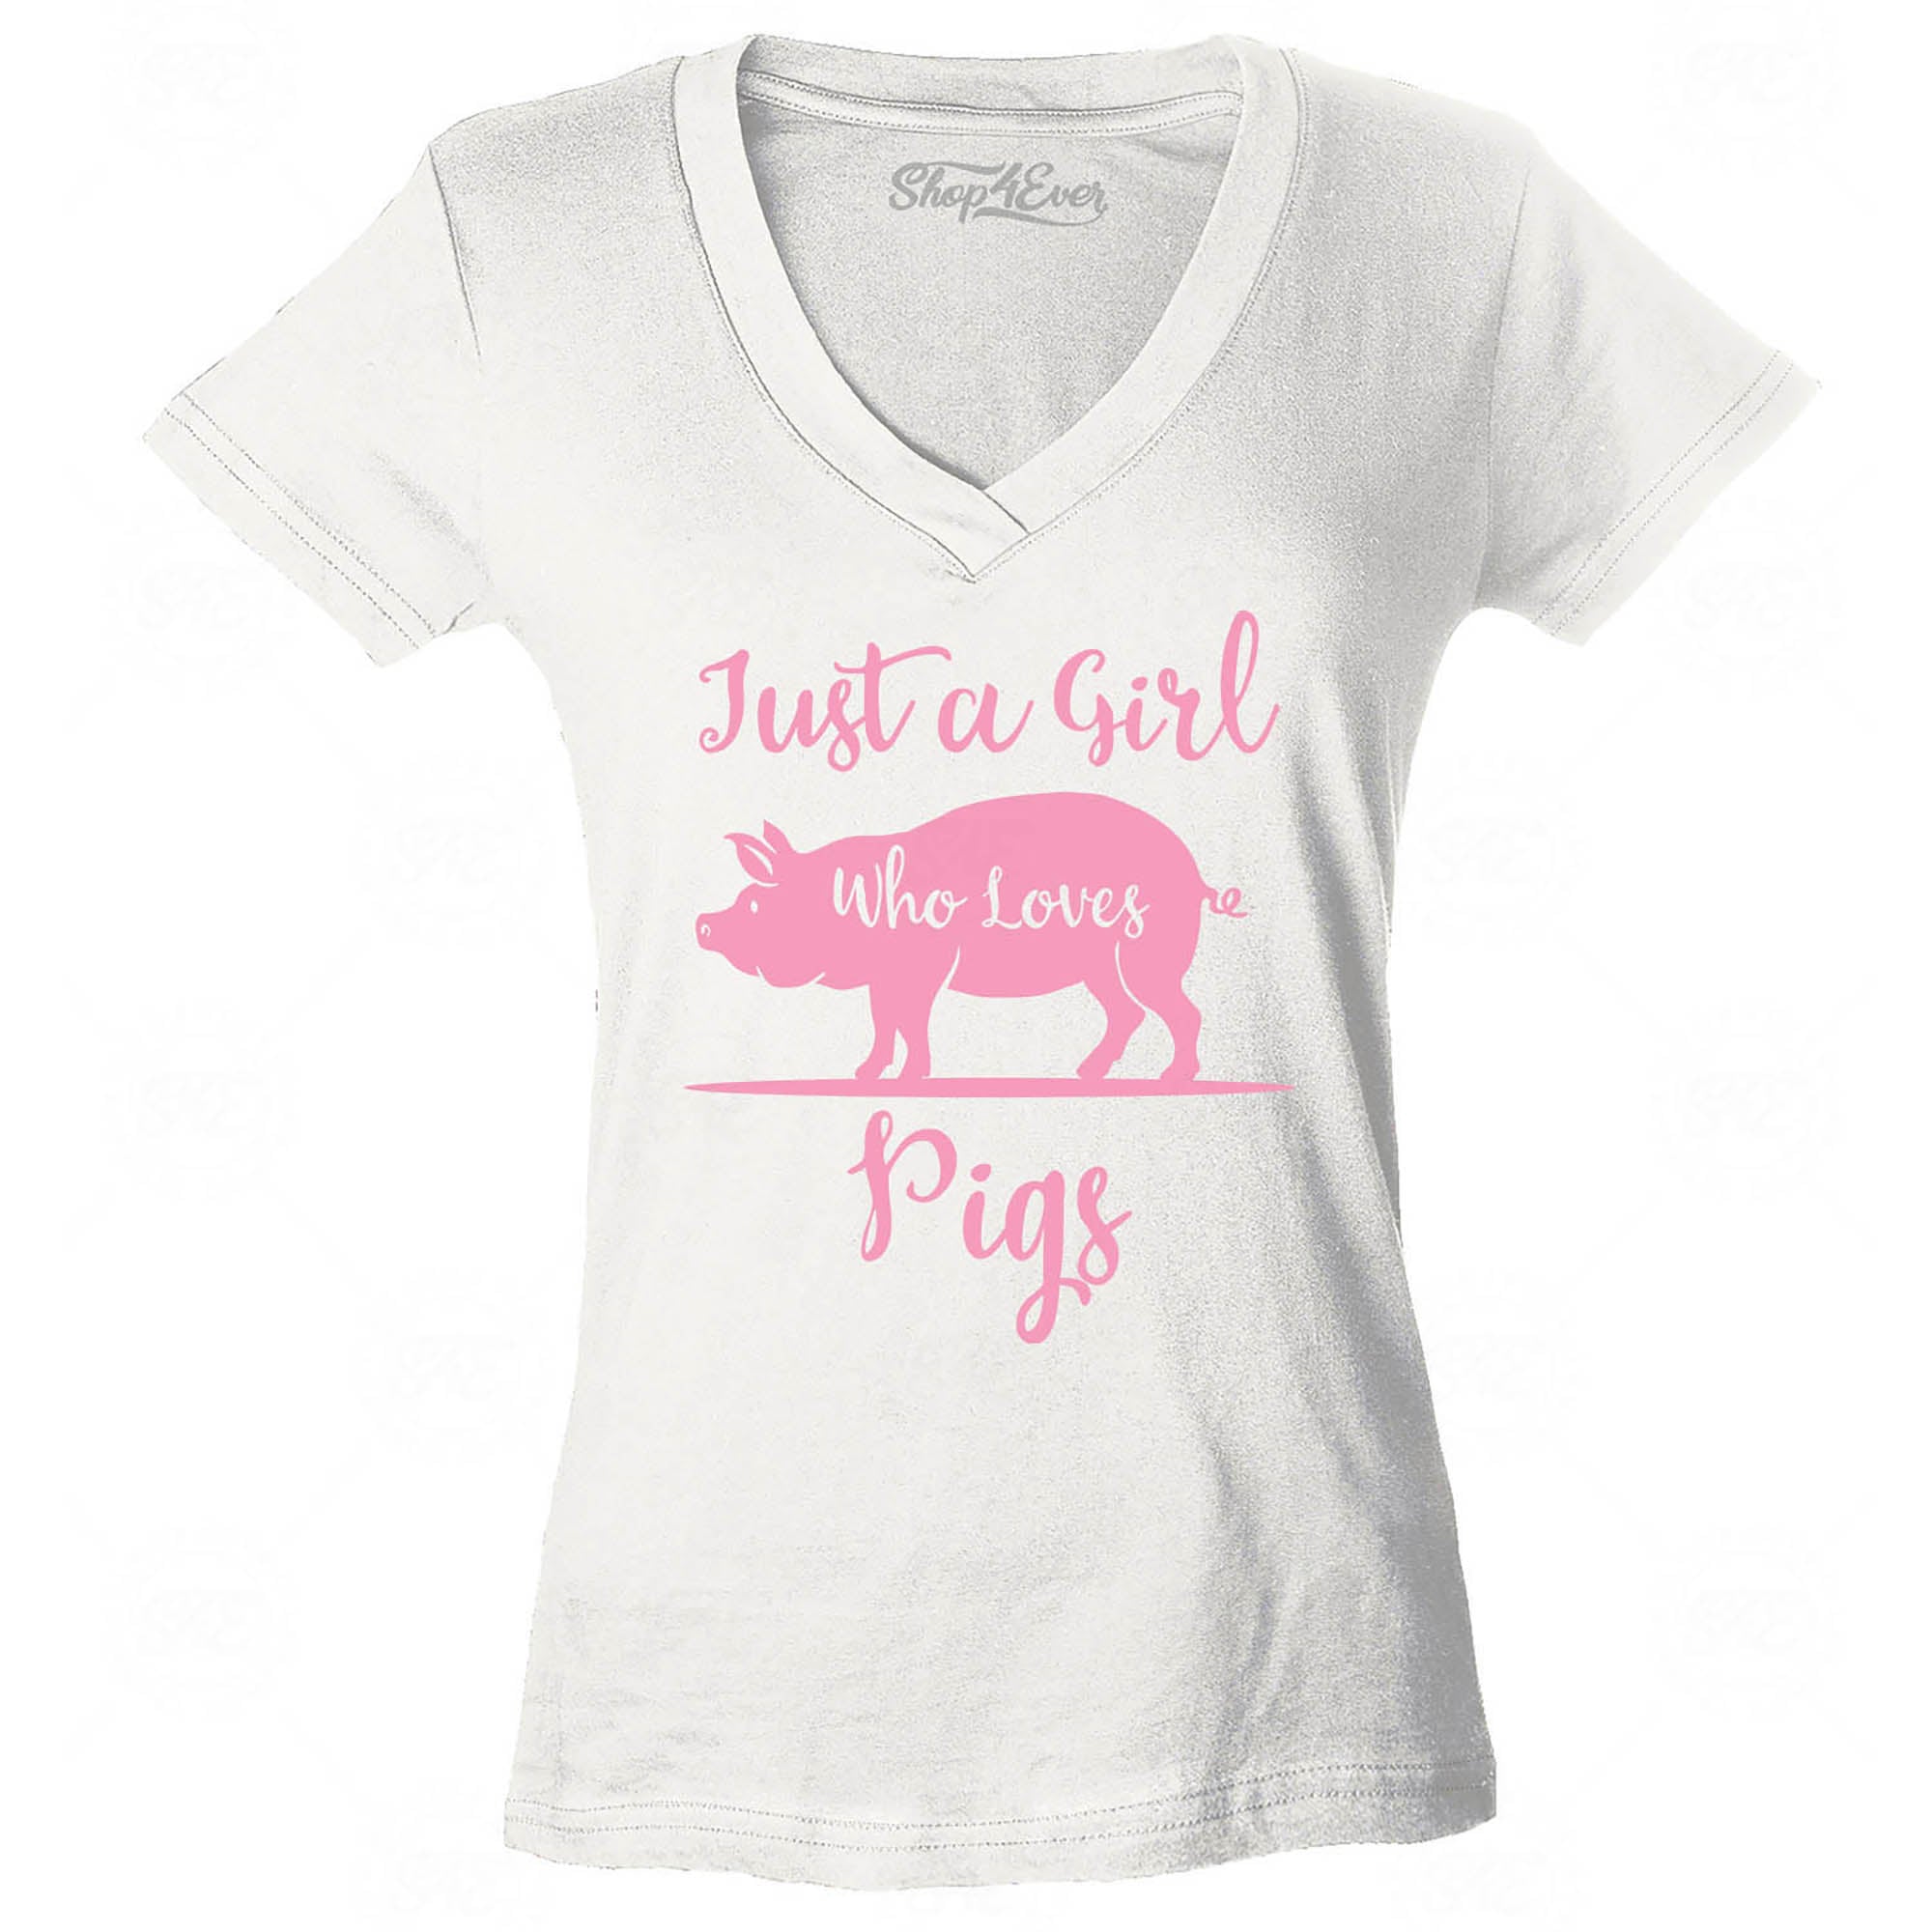 Just A Girl Who Loves Pigs Women's V-Neck T-Shirt Slim Fit